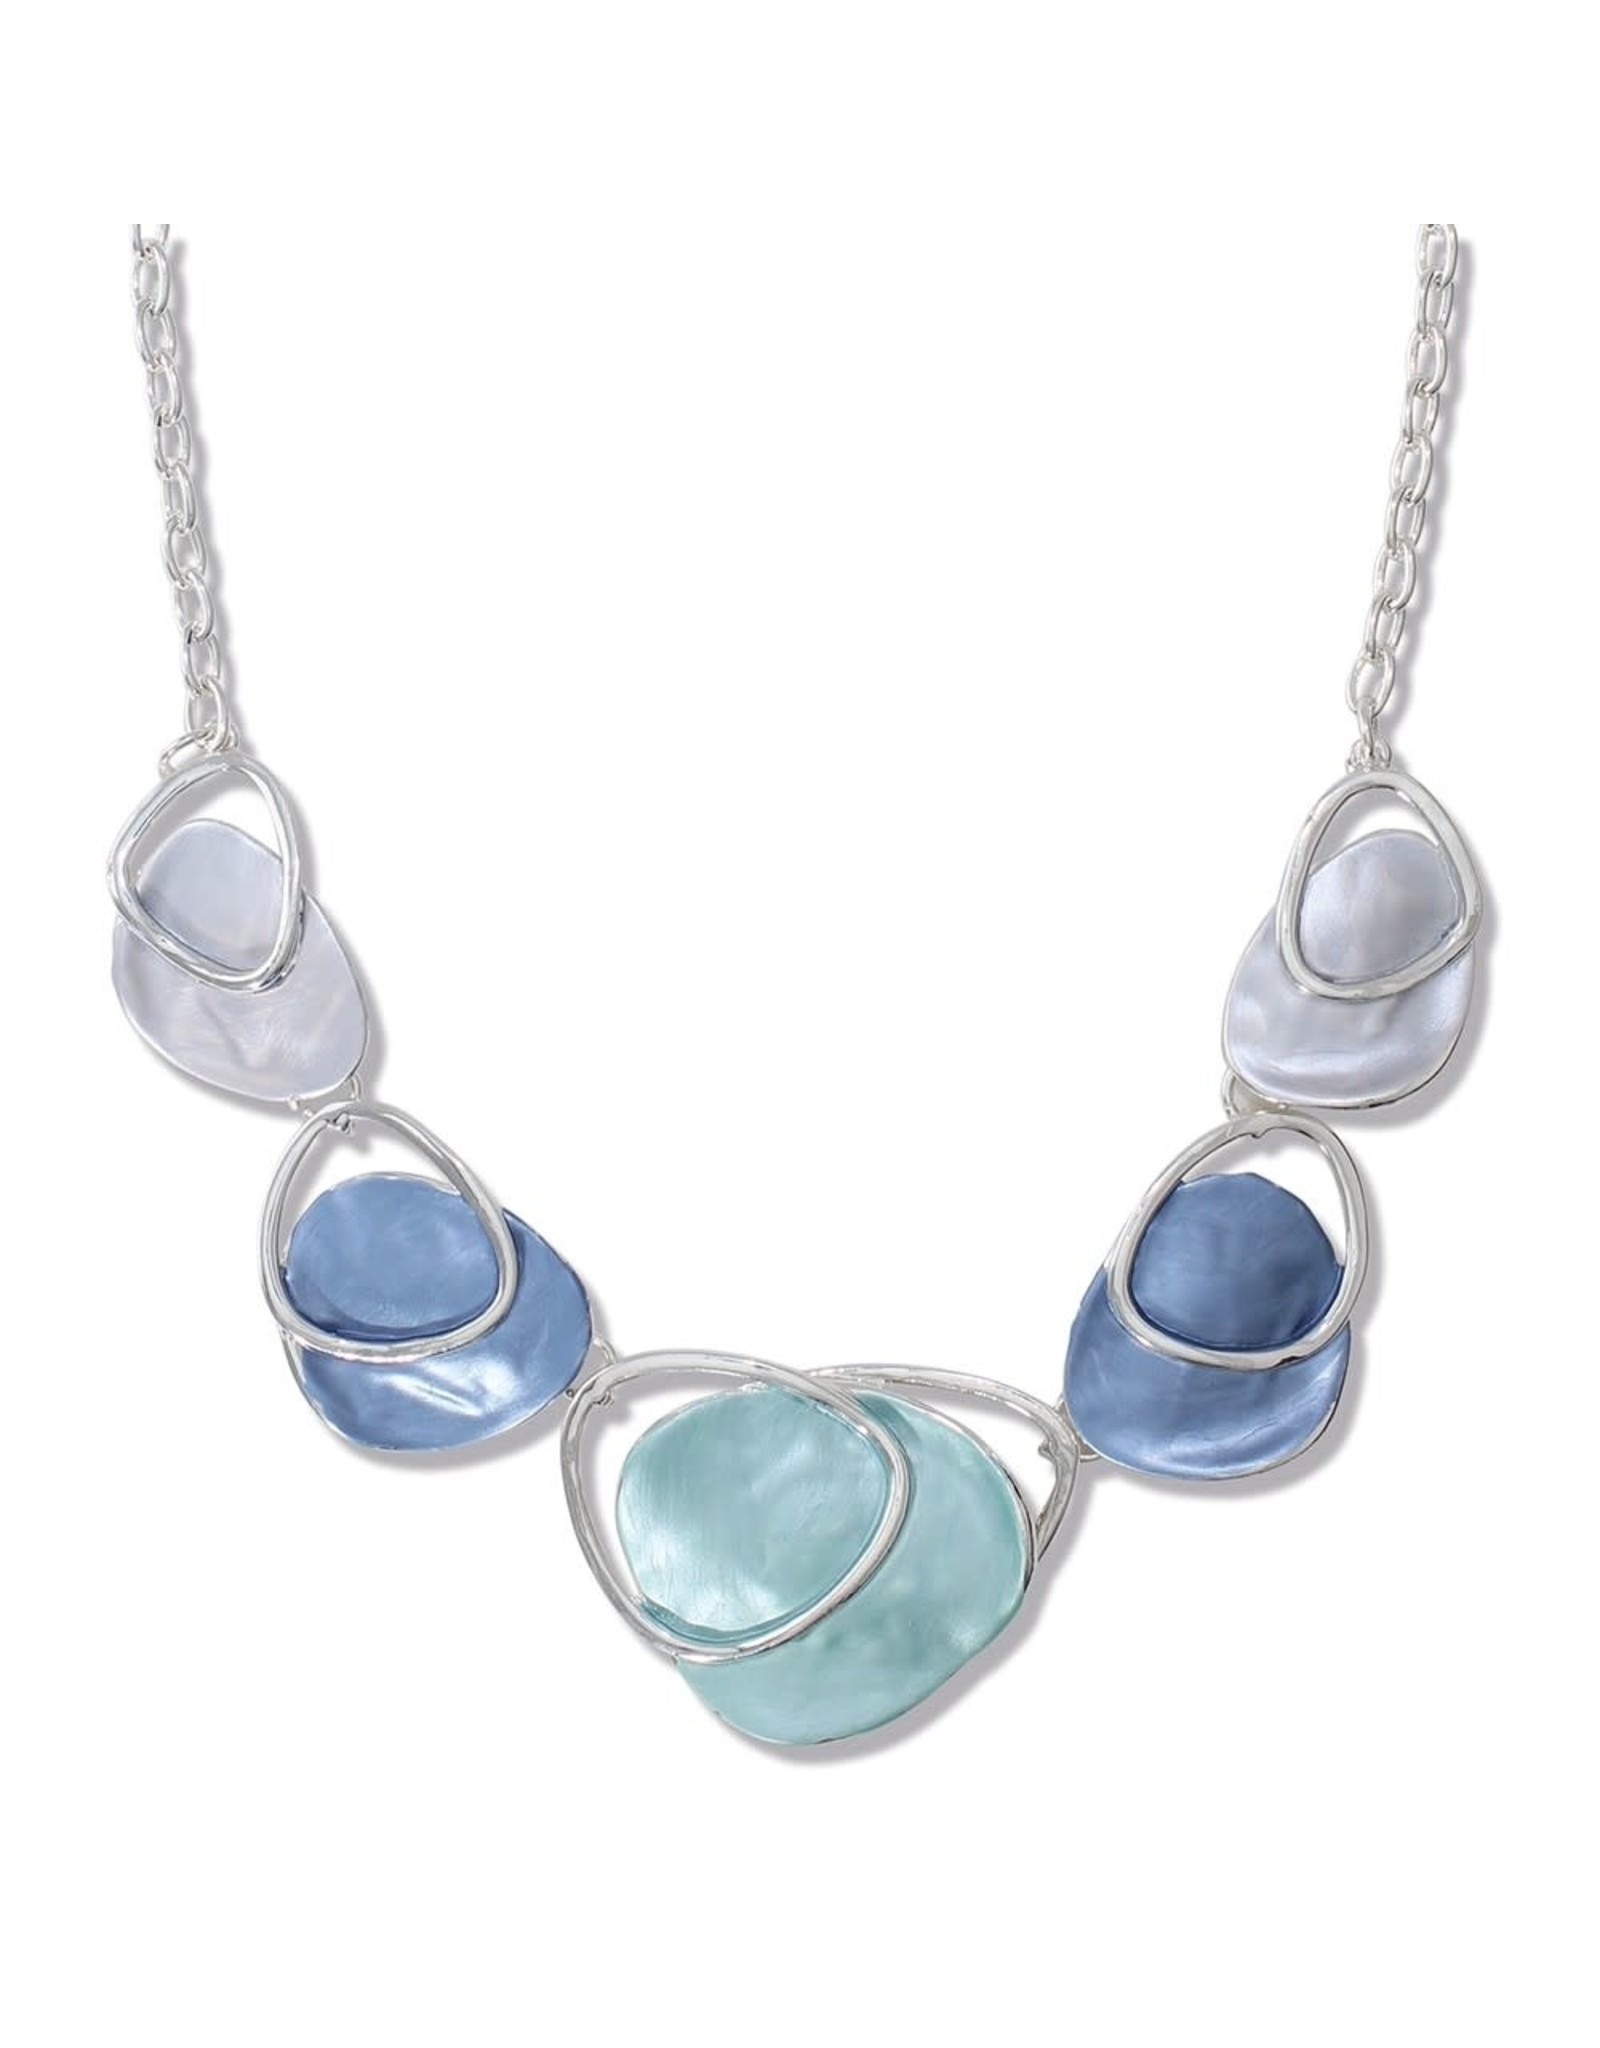 Periwinkle by Barlow Necklace Silver W Gray Blue And Aqua Enamels